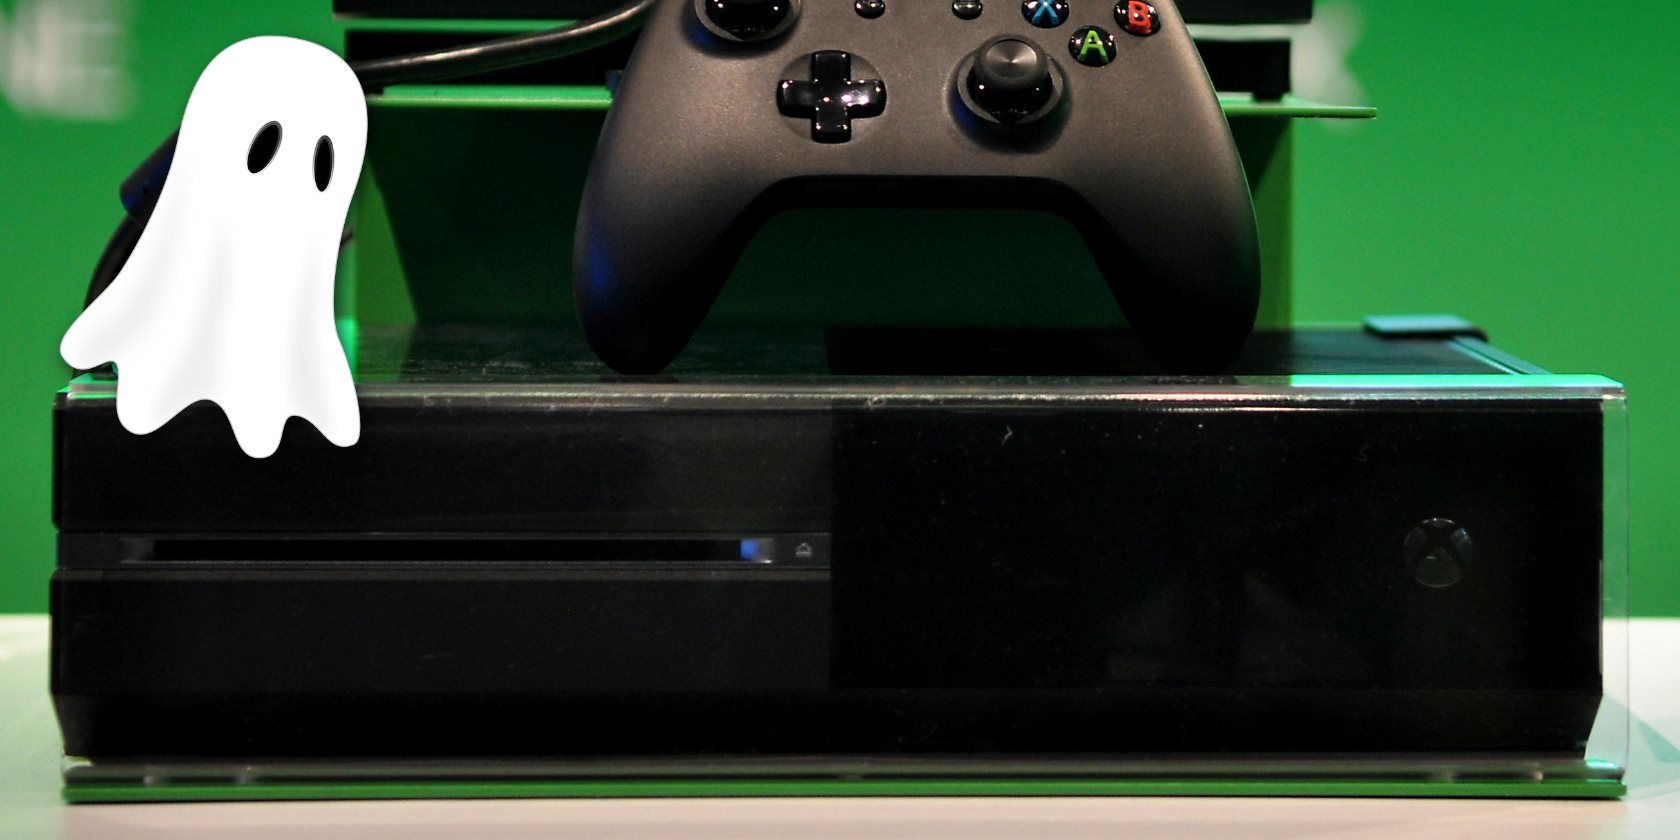 Why does my Xbox One keep turning off?